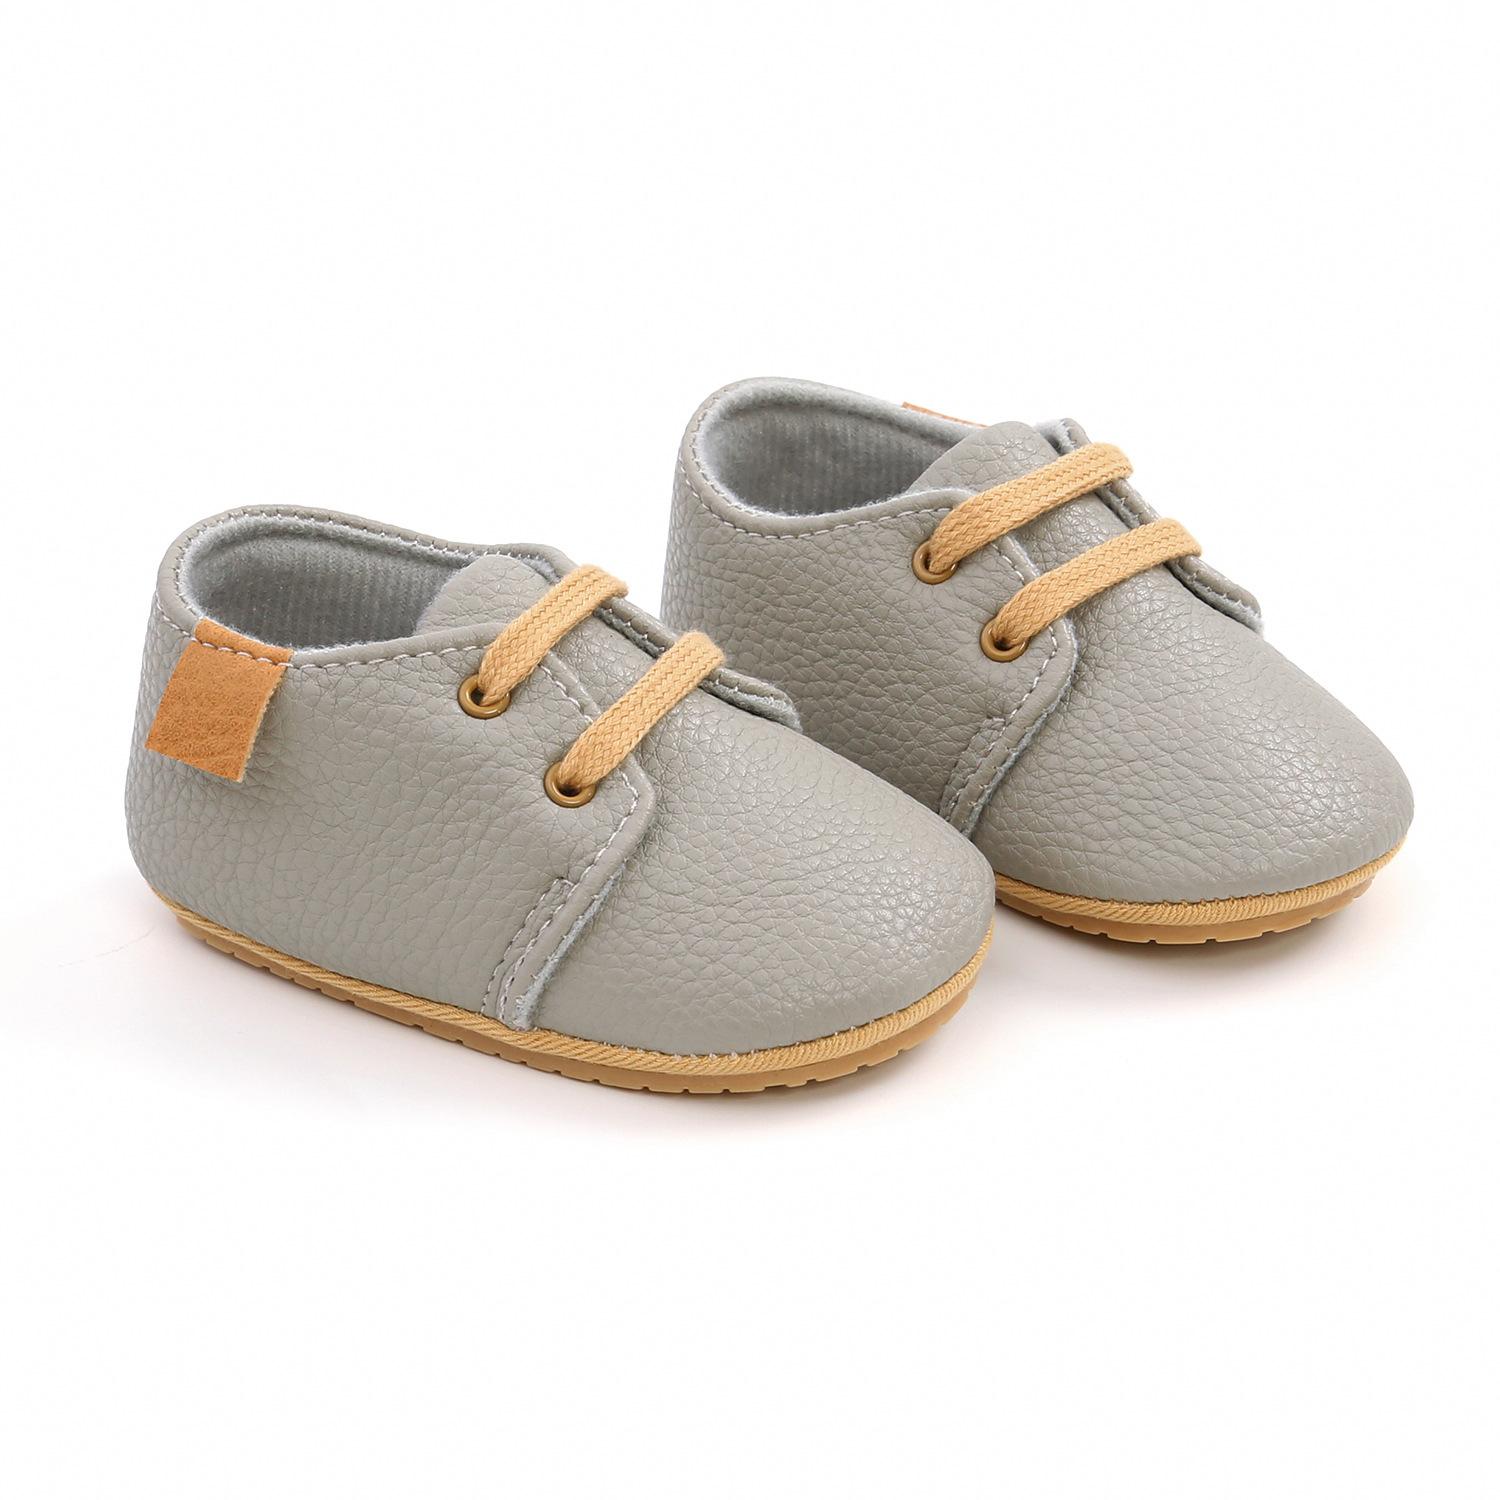 Anti-slip Leather Shoes For Baby